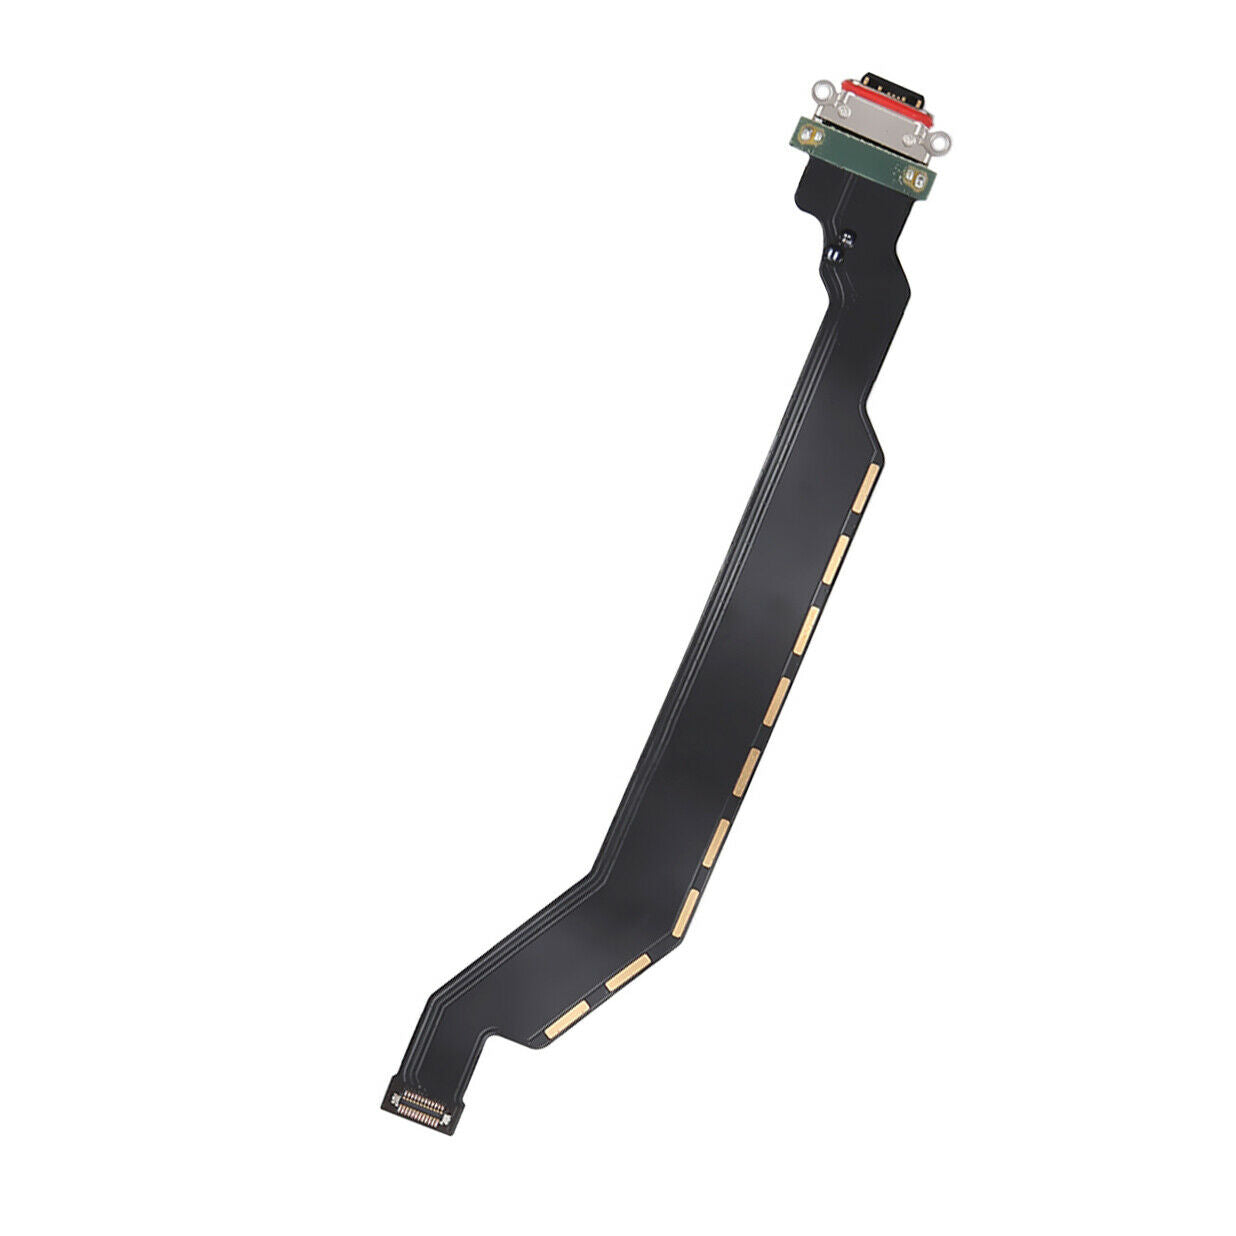 OnePlus 6 Charging Port Flex Cable for [product_price] - First Help Tech